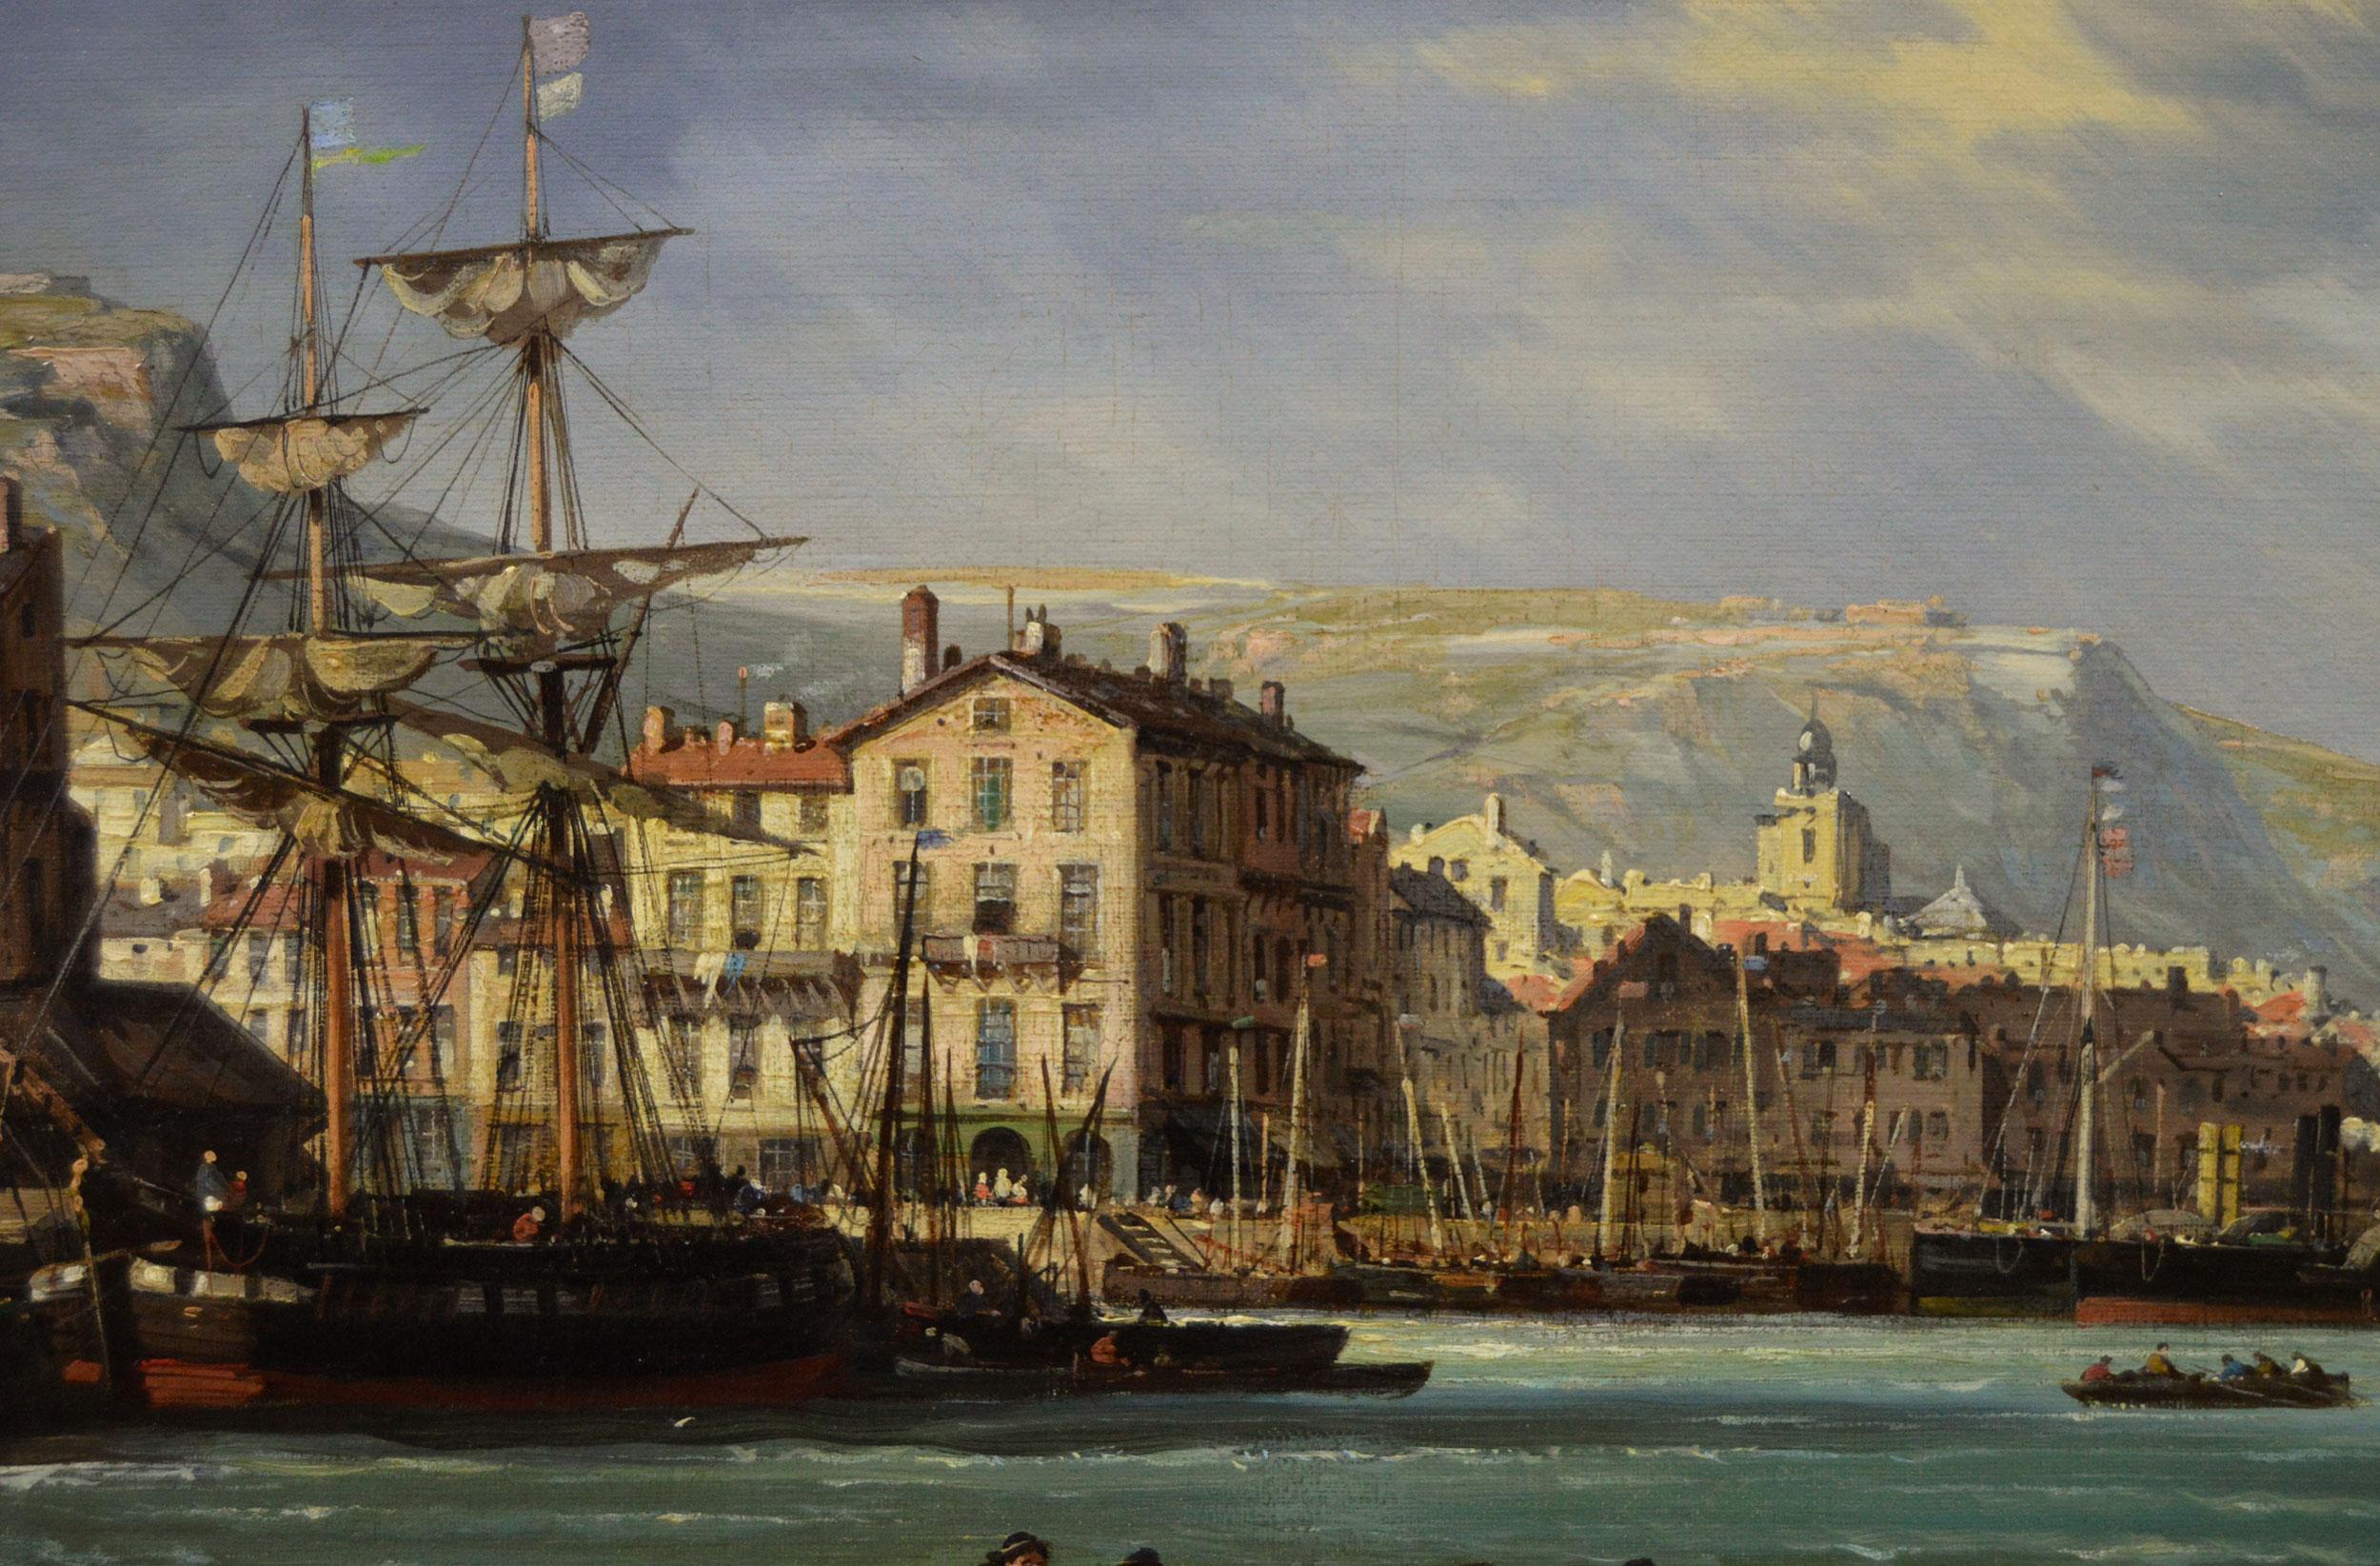 Charles Euphrasie Kuwasseg  
French, (1838-1904)
A Normandy Port
Oil on canvas, signed & dated 1875
Image size: 21.5 inches x 38.75 inches
Size including frame: 30.25 inches x 47.5 inches

A wonderful seascape painting of a port in Normandy by